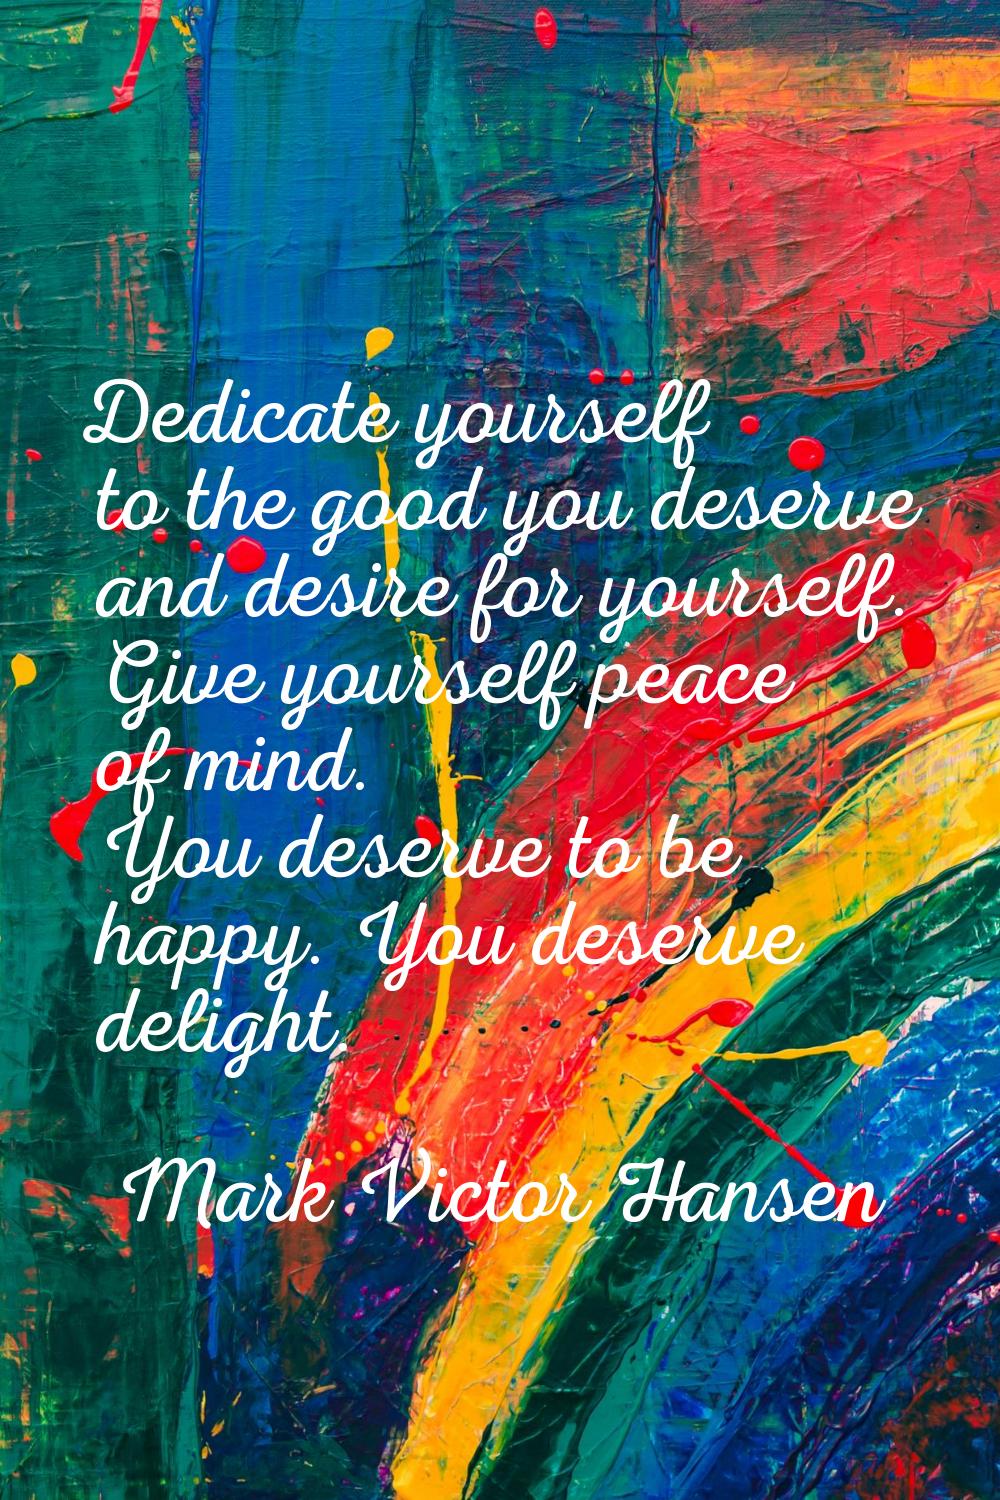 Dedicate yourself to the good you deserve and desire for yourself. Give yourself peace of mind. You